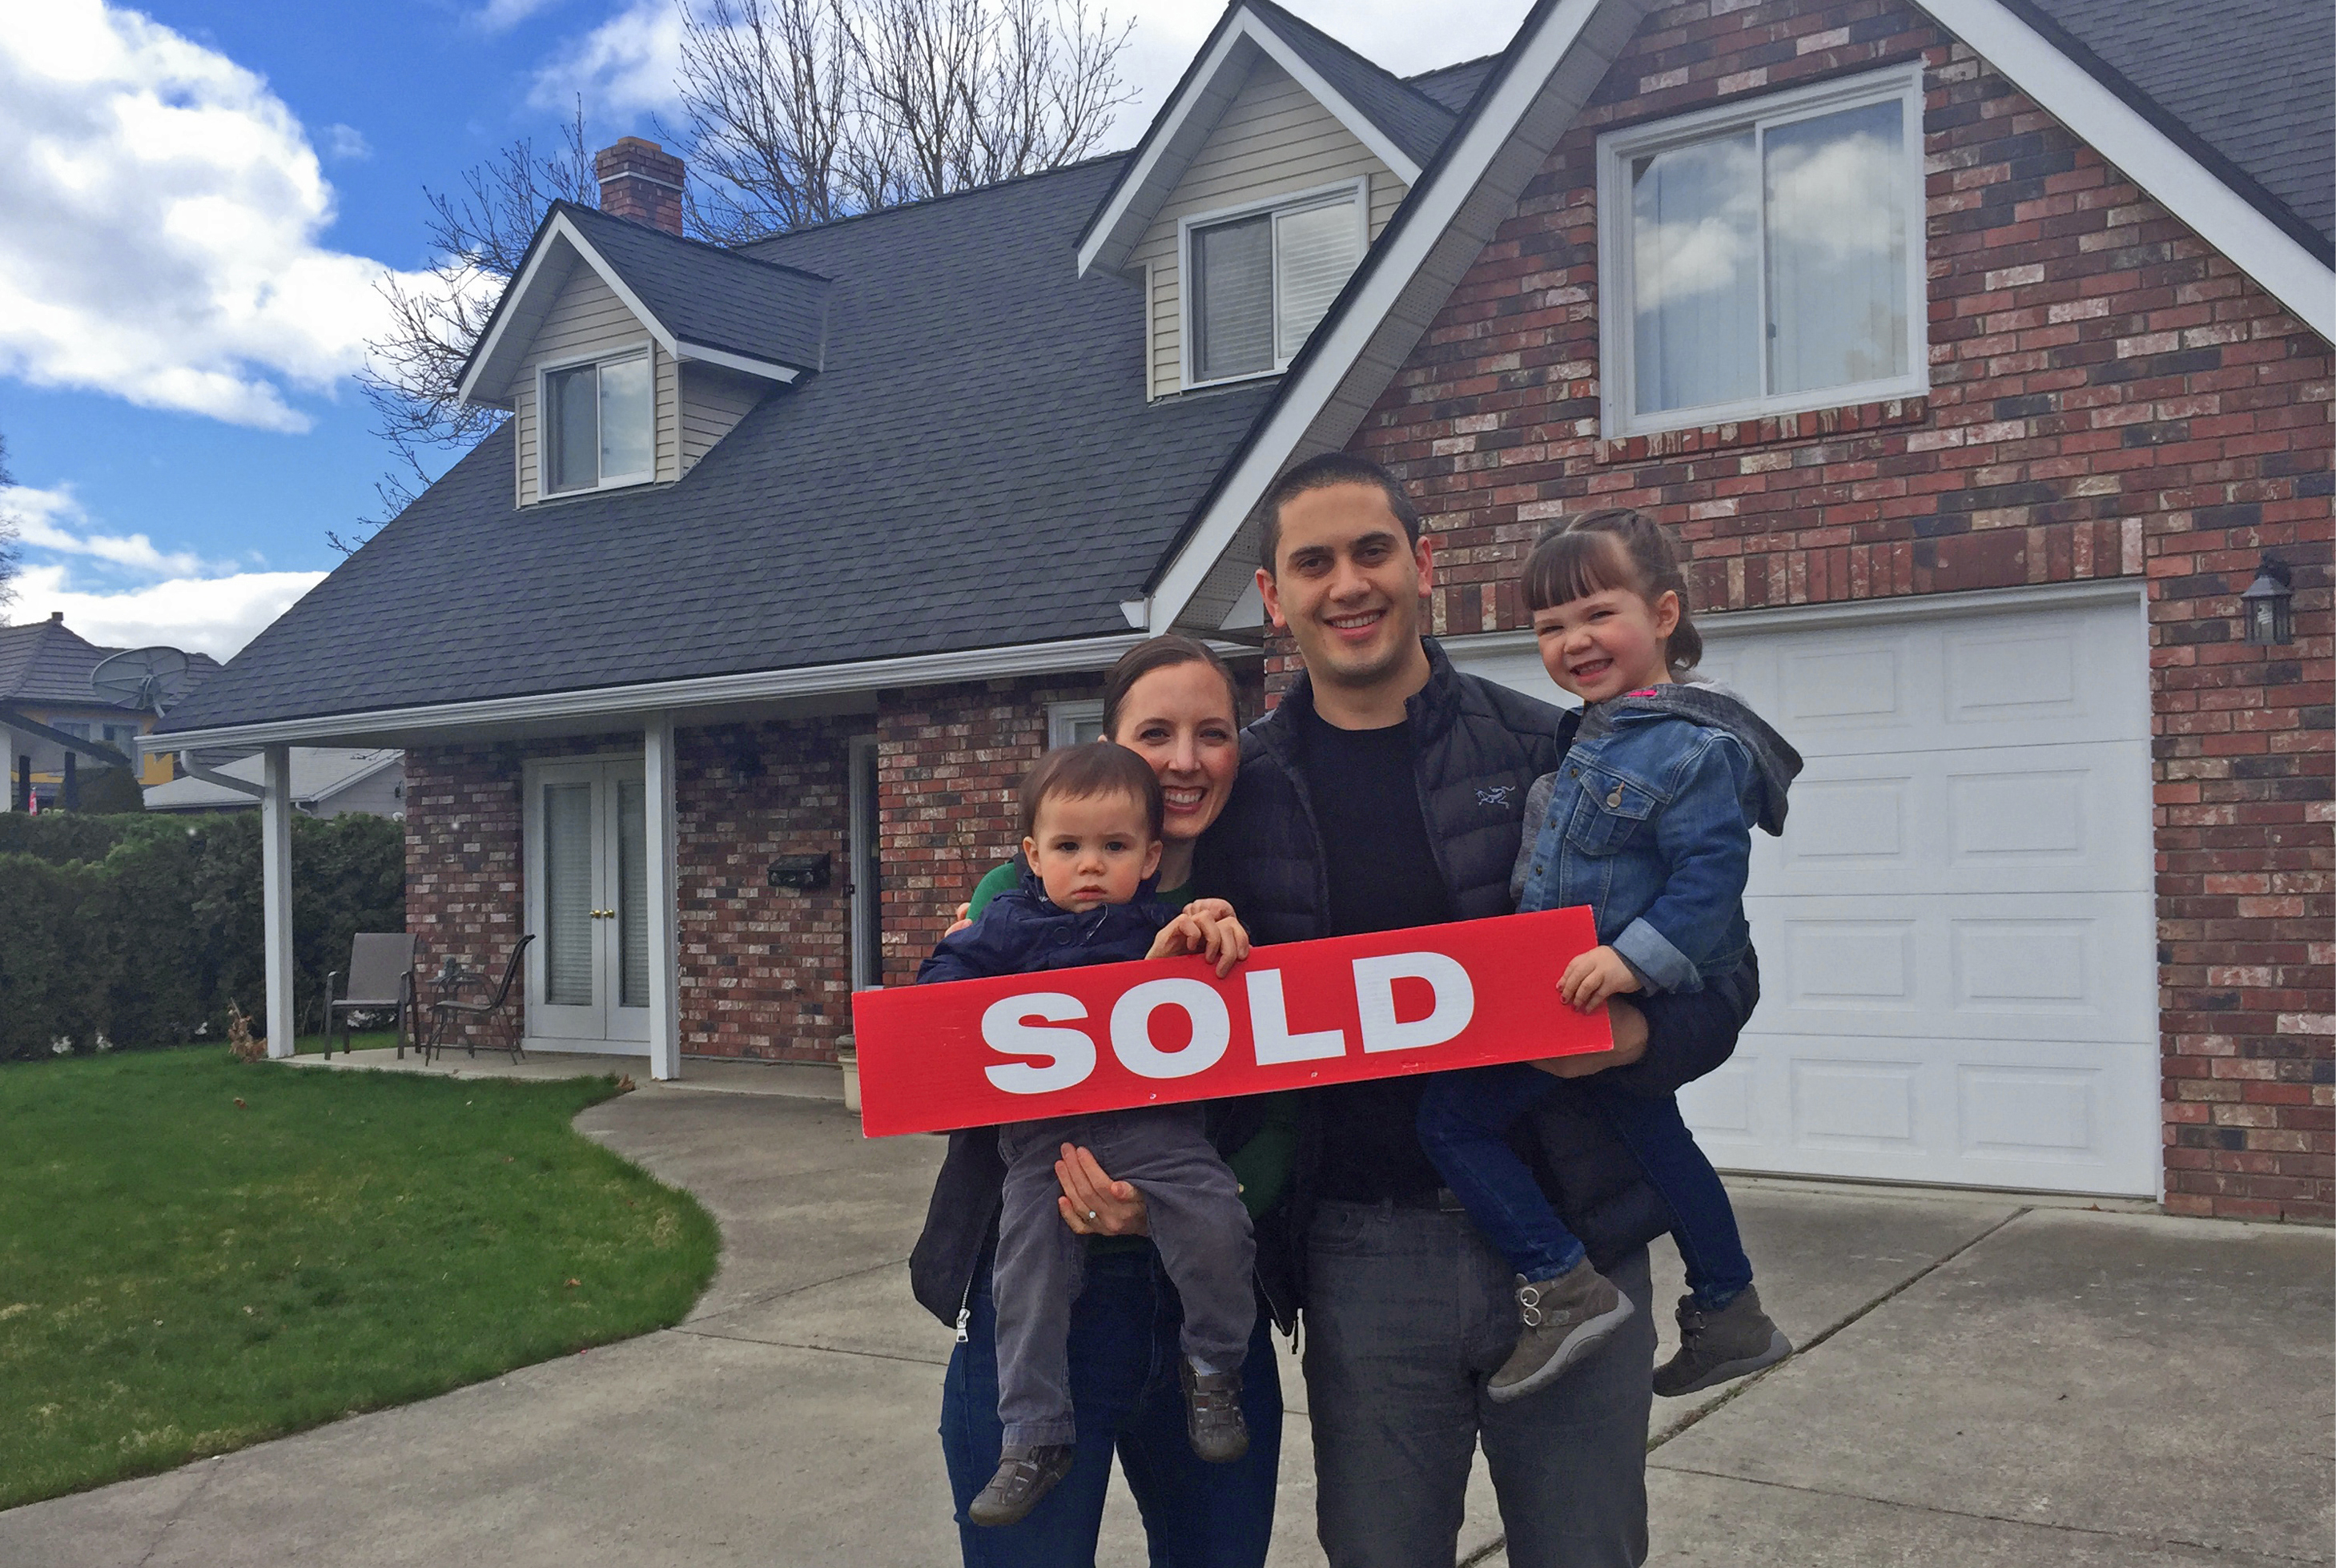 Colleen, Shane and their kids celebrating the purchase of their forever home.